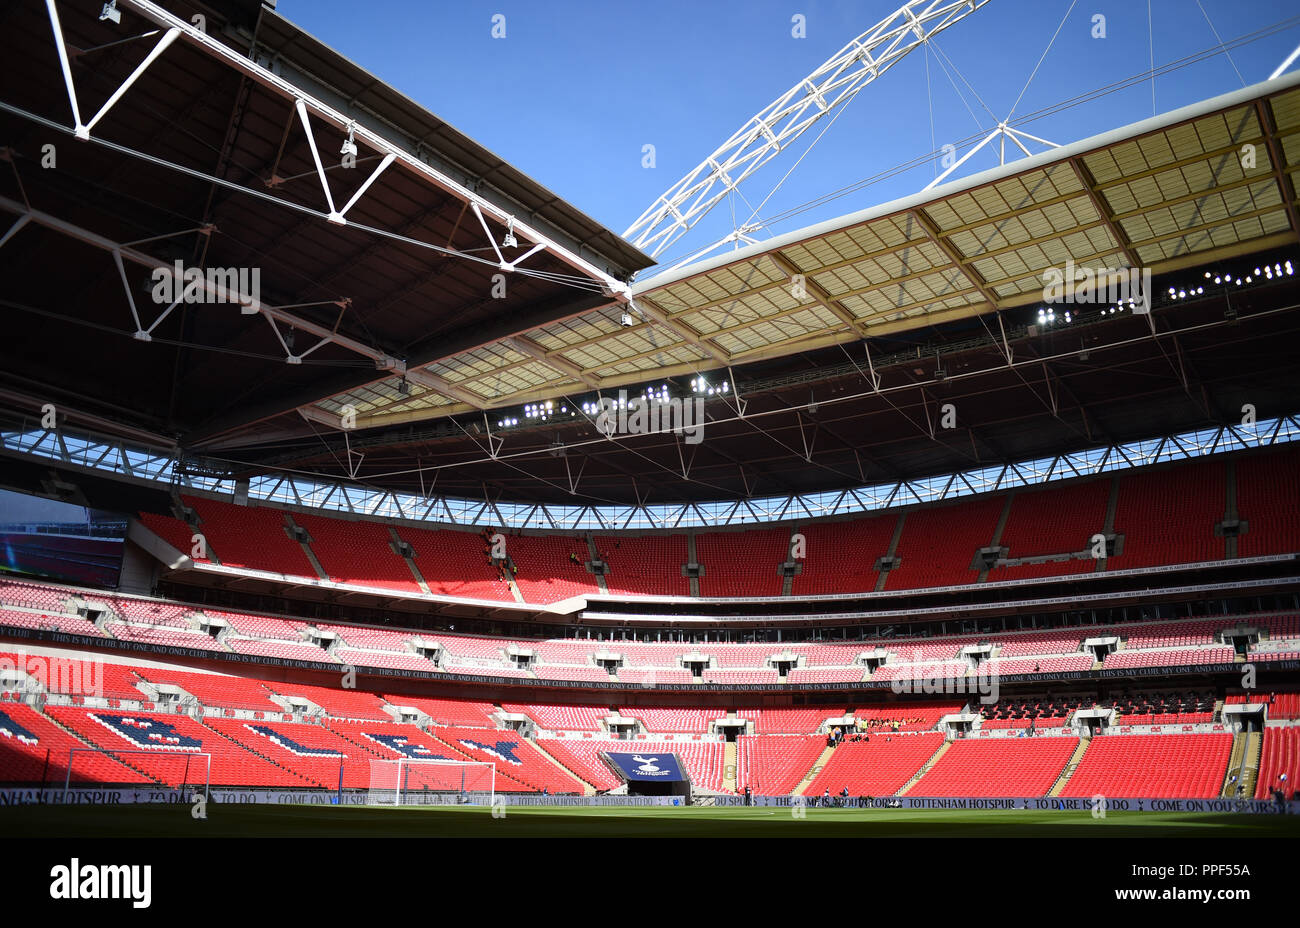 Wembley Stadium for Premier League match between Tottenham Hotspur and Liverpool at Wembley Stadium , London , 15 Sept 2018 Editorial use only. No merchandising. For Football images FA and Premier League restrictions apply inc. no internet/mobile usage without FAPL license - for details contact Football Dataco Stock Photo